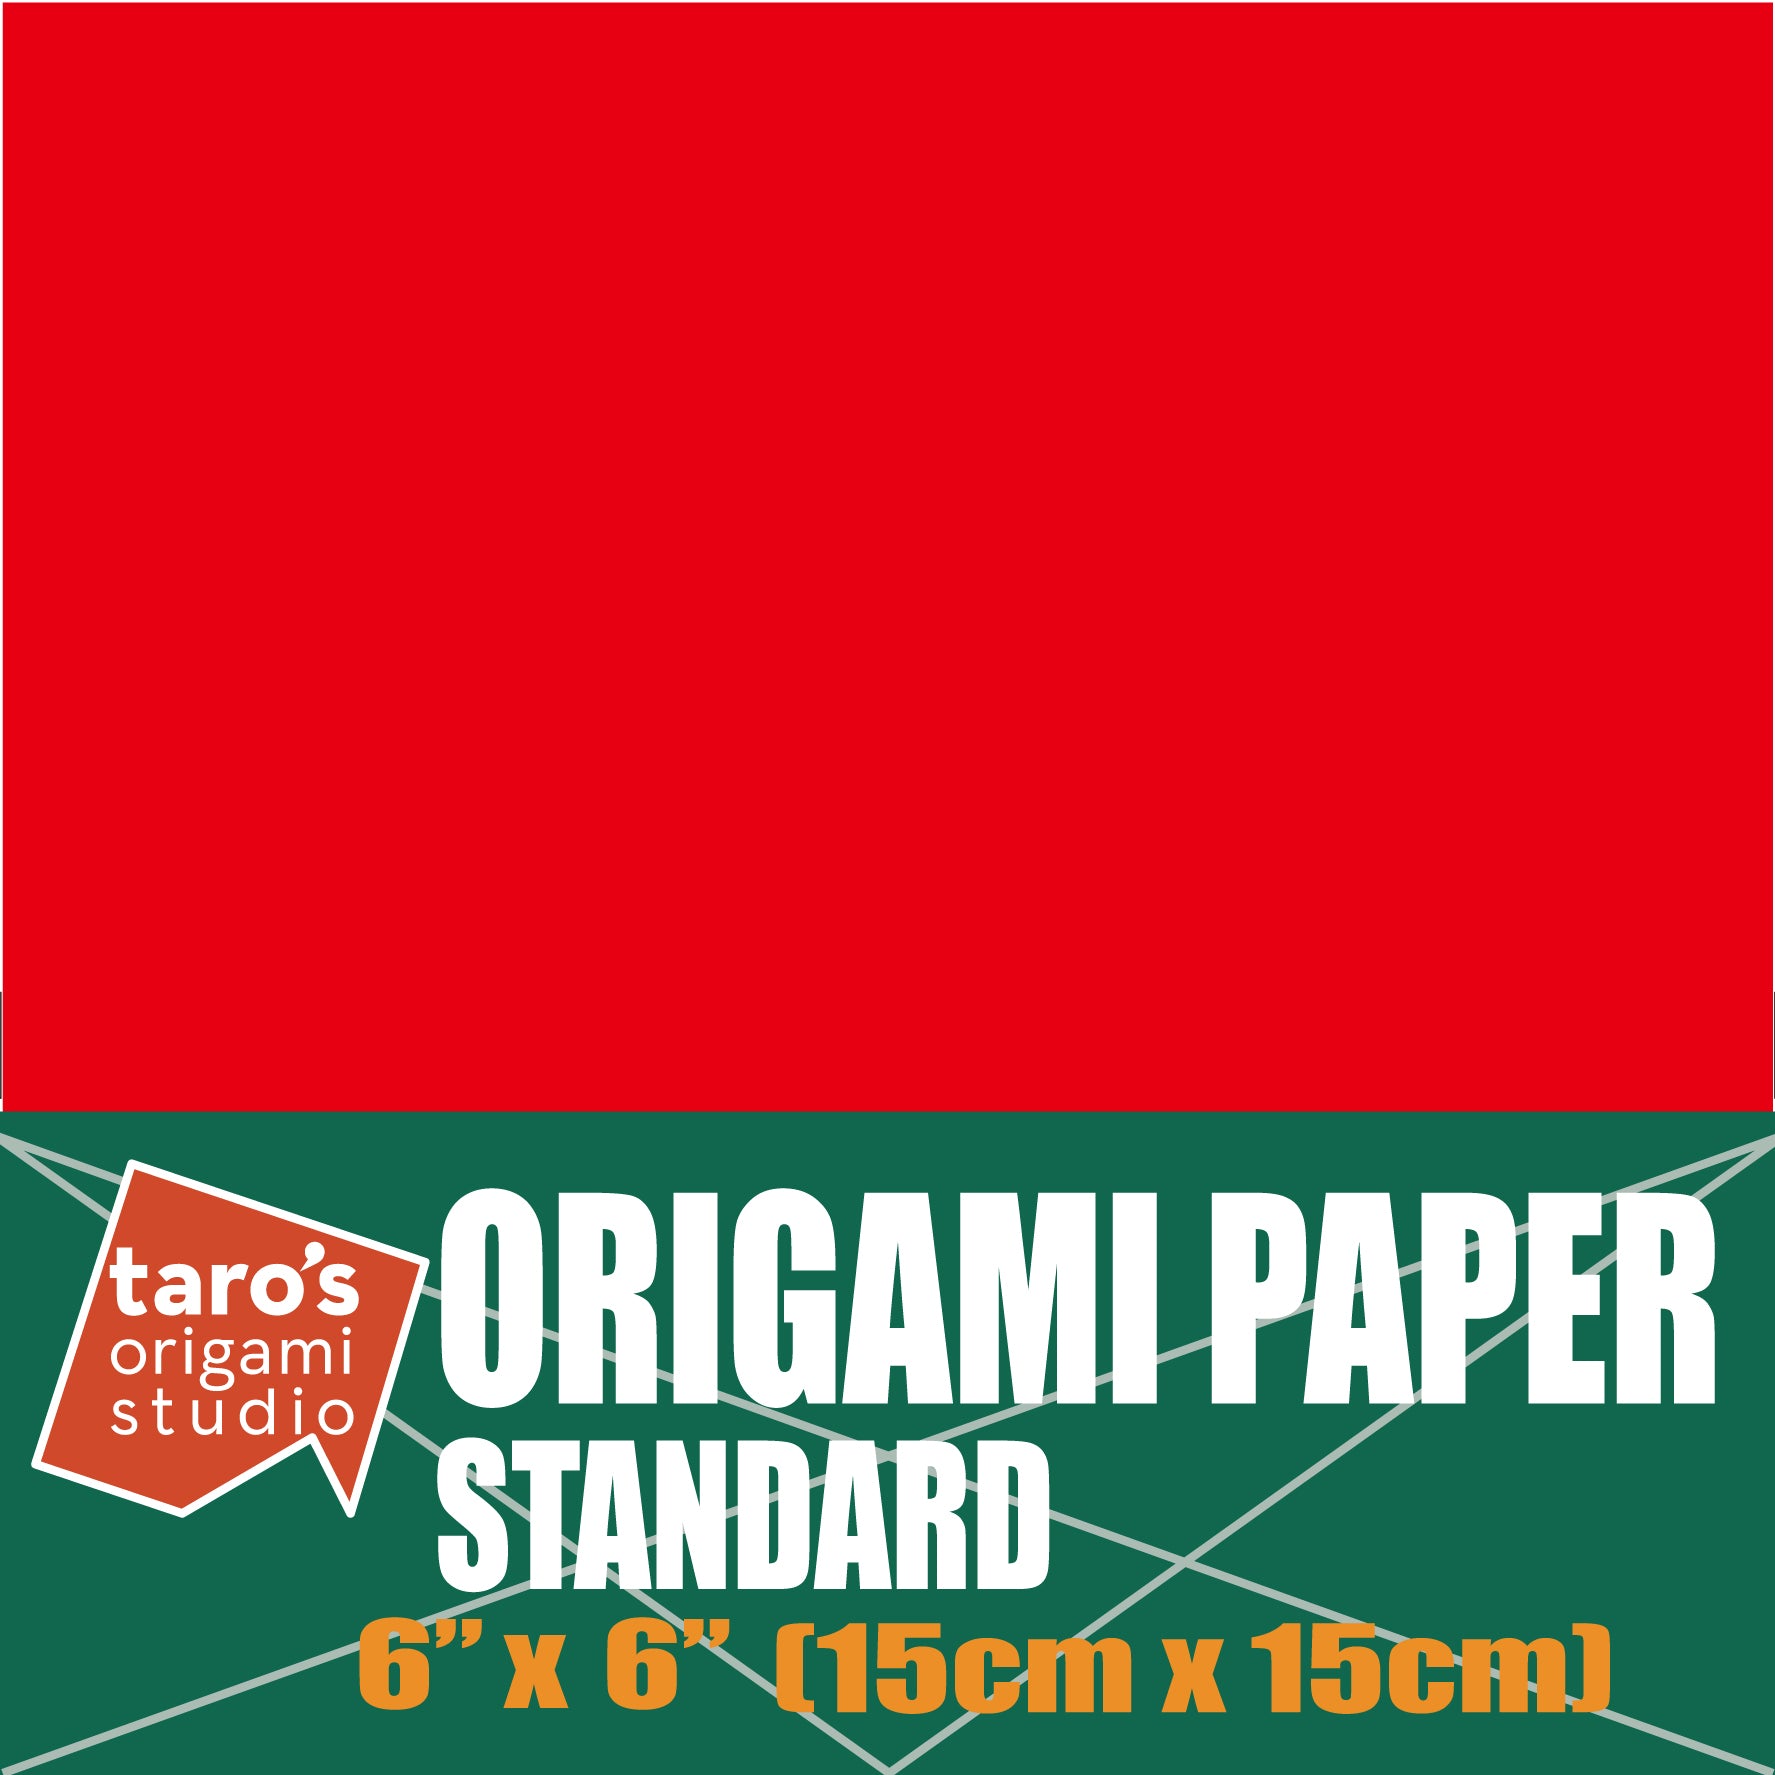 Standard 6 Inch One Sided Single Color (Purple) 50 Sheets (All Same Color)  Square Easy Fold Premium Japanese Paper for Beginner (Made in Japan) -  Taro's Origami Studio E-learning and Shop